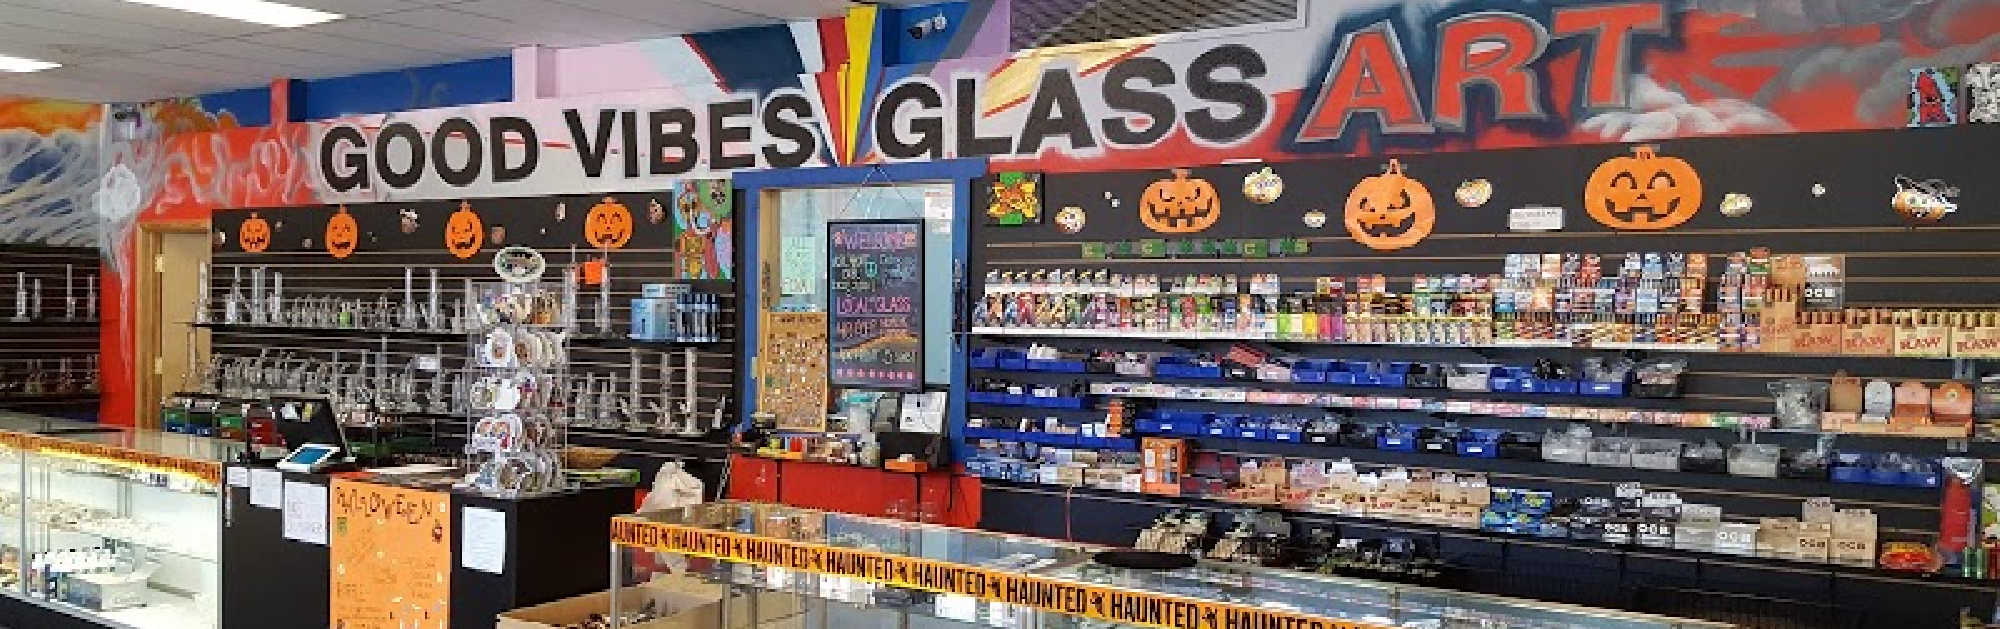 image of good vibes glass art in loveland colorado